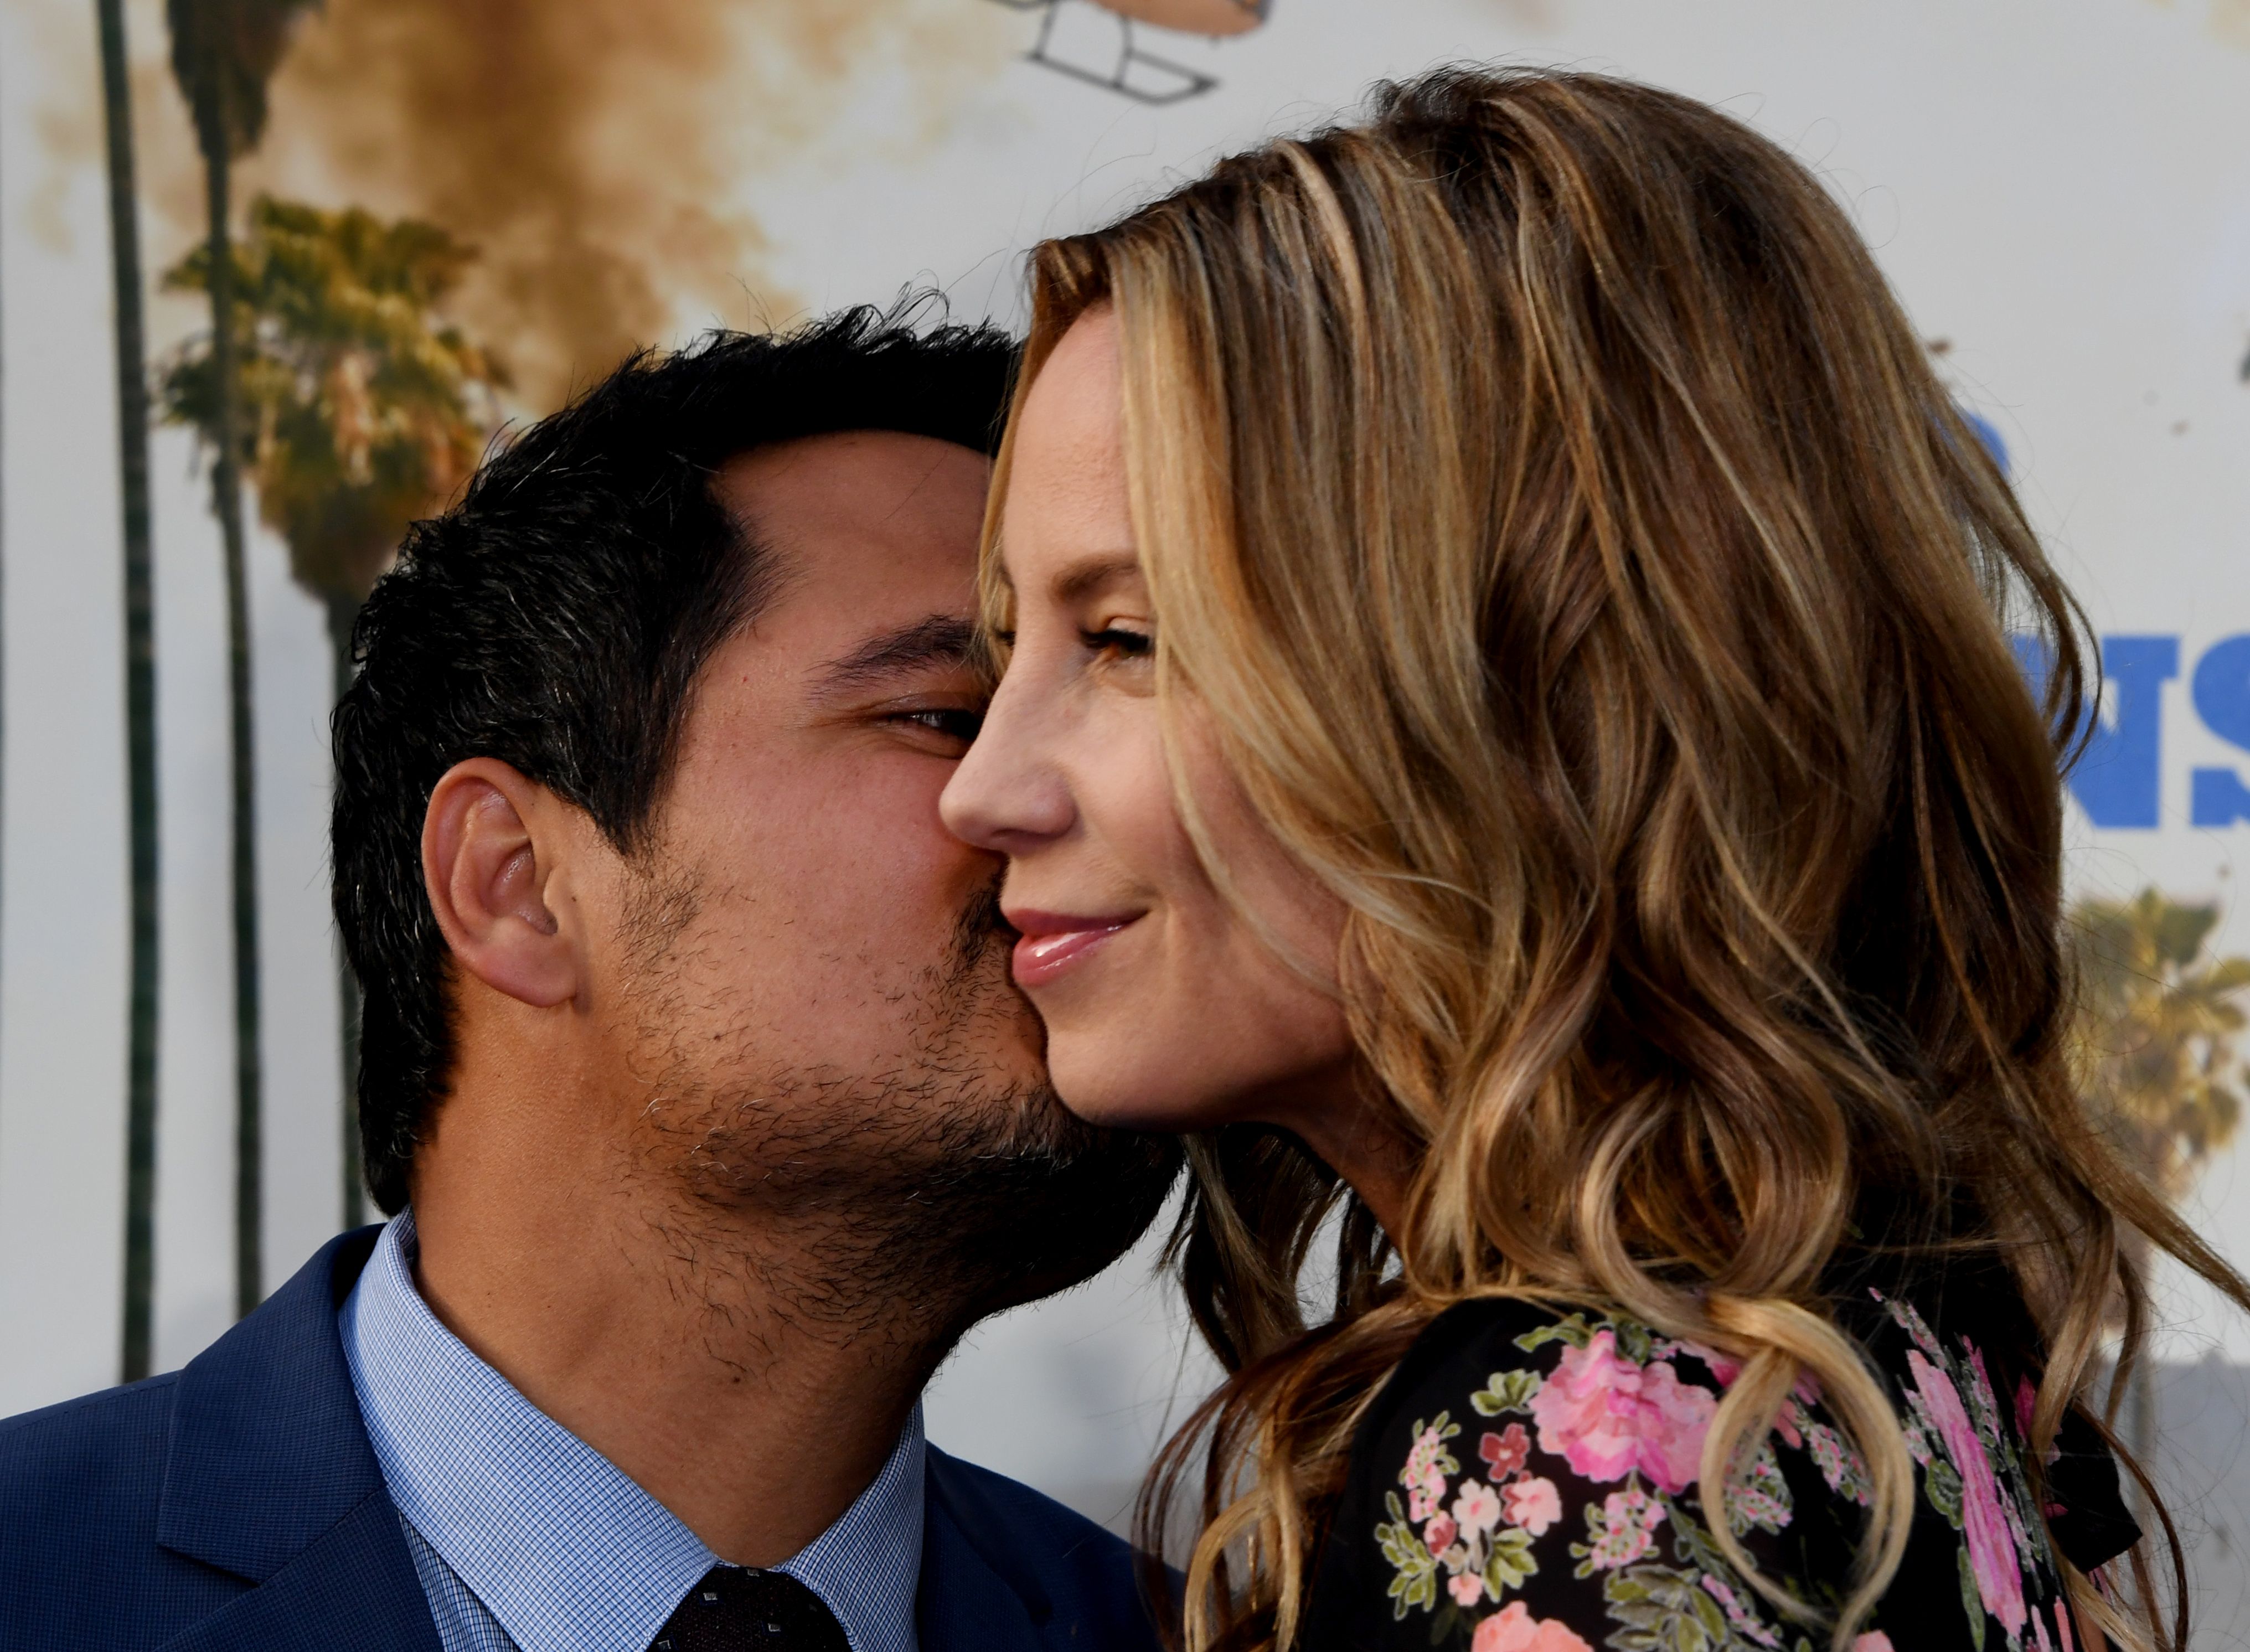 Actor Michael Pena (L) and screenwriter Brie Shaffer arrive for the premiere of "CHiPS" at the TCL Chinese Theatre in Hollywood, California, on March 20, 2017. | Source: Getty Images